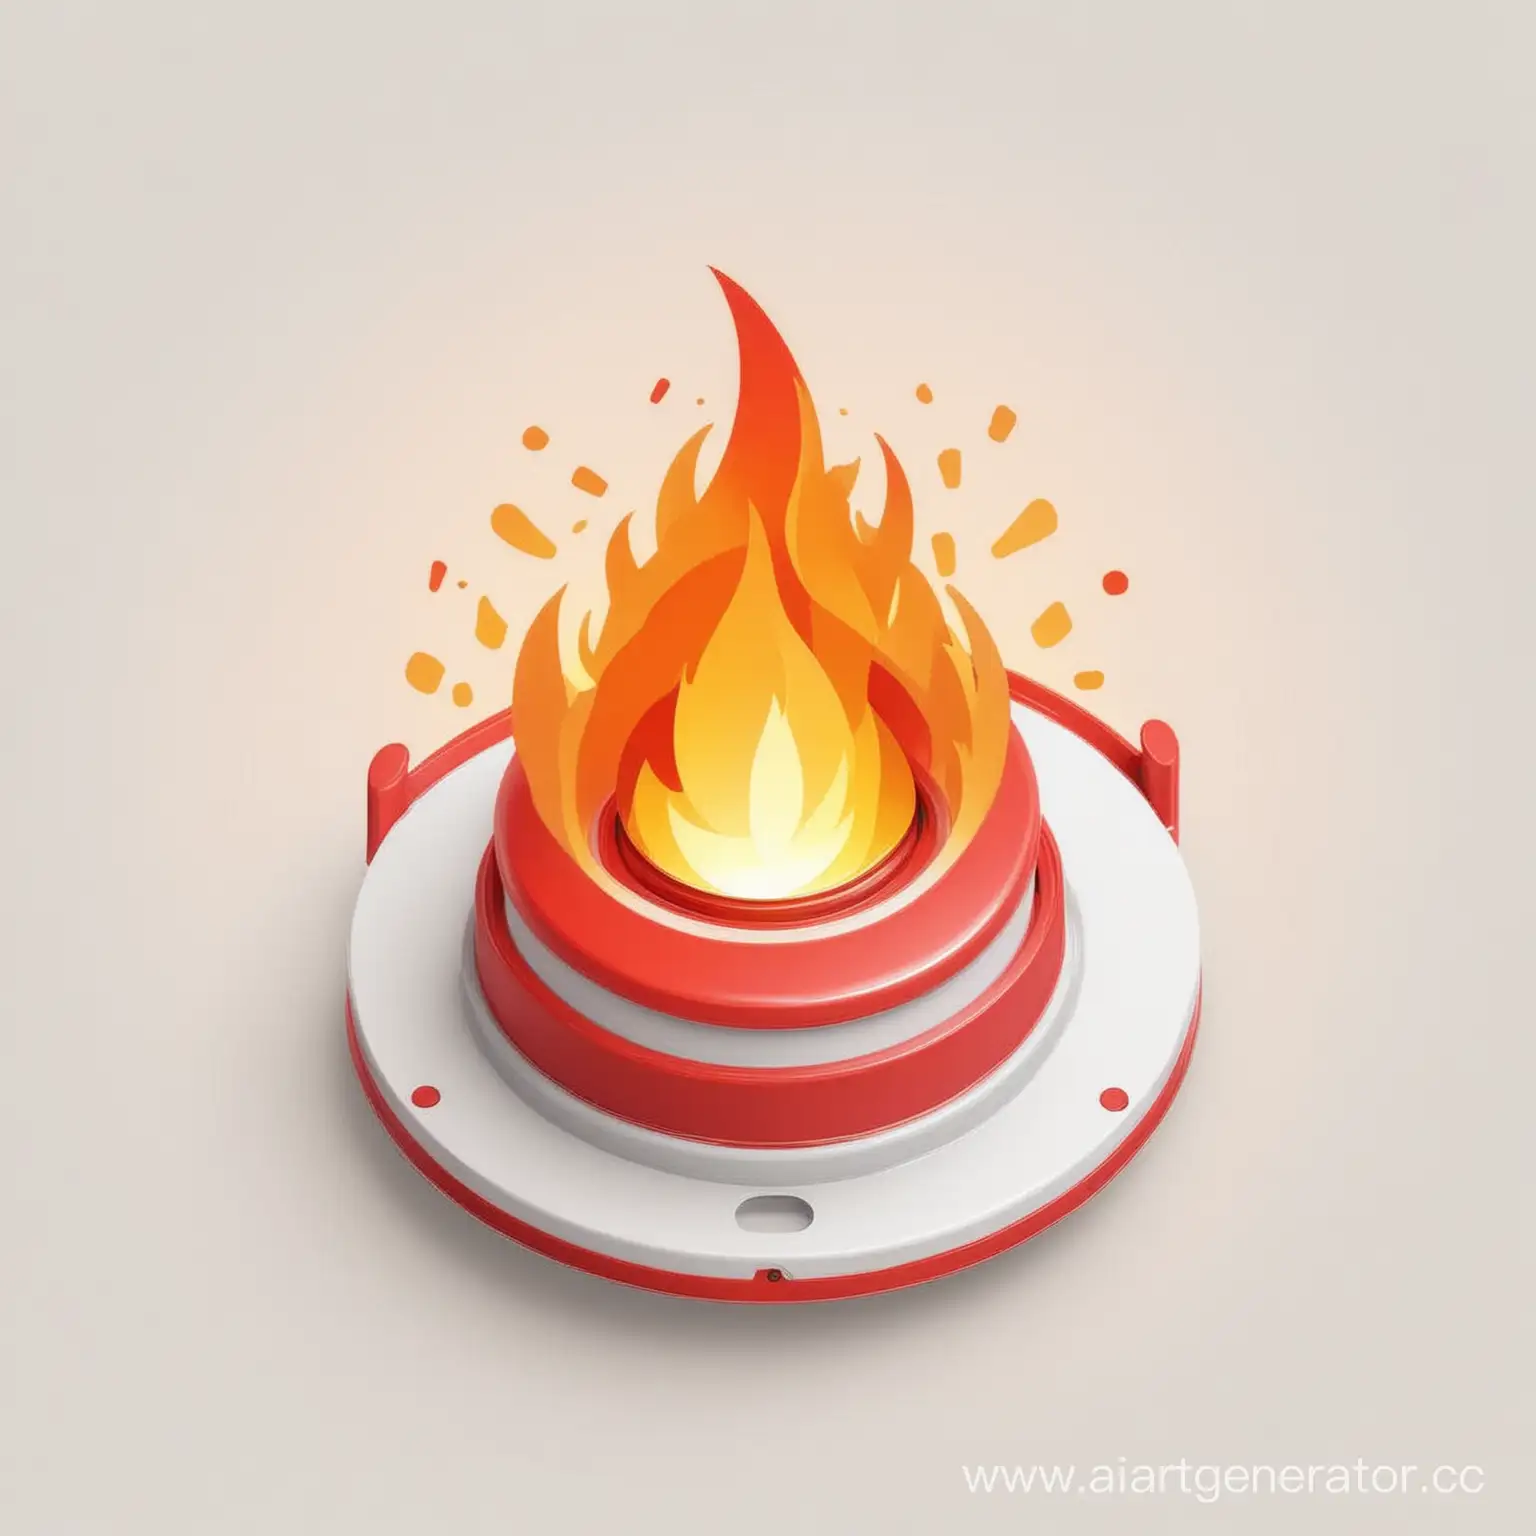 Fire-Alarm-Icon-on-White-Background-in-Emoji-Style-SAI-Isometry